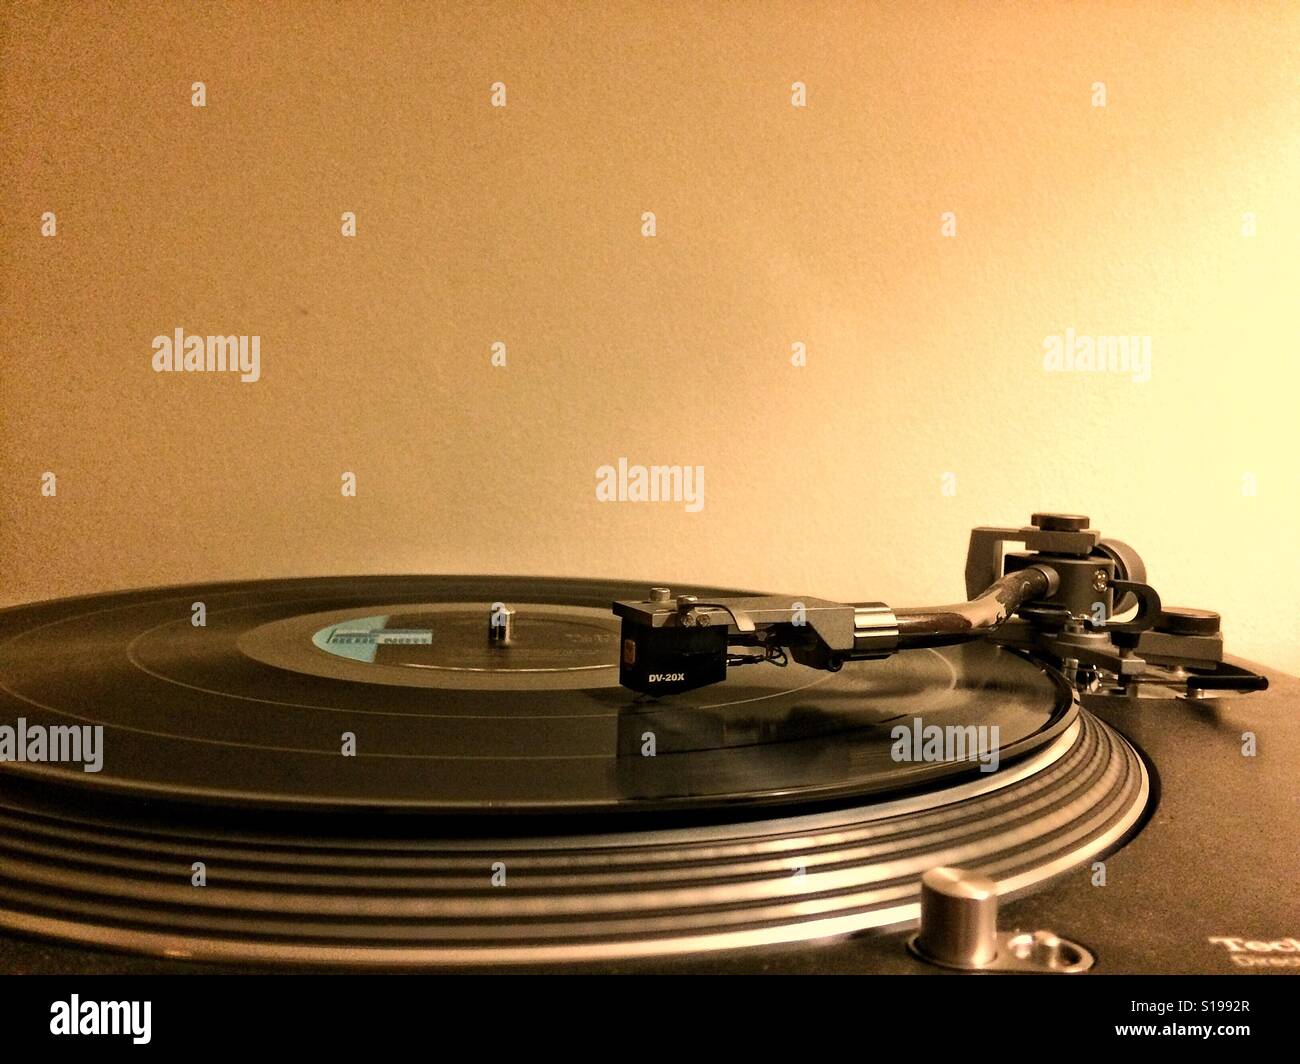 Technics turntable spinning a record Stock Photo